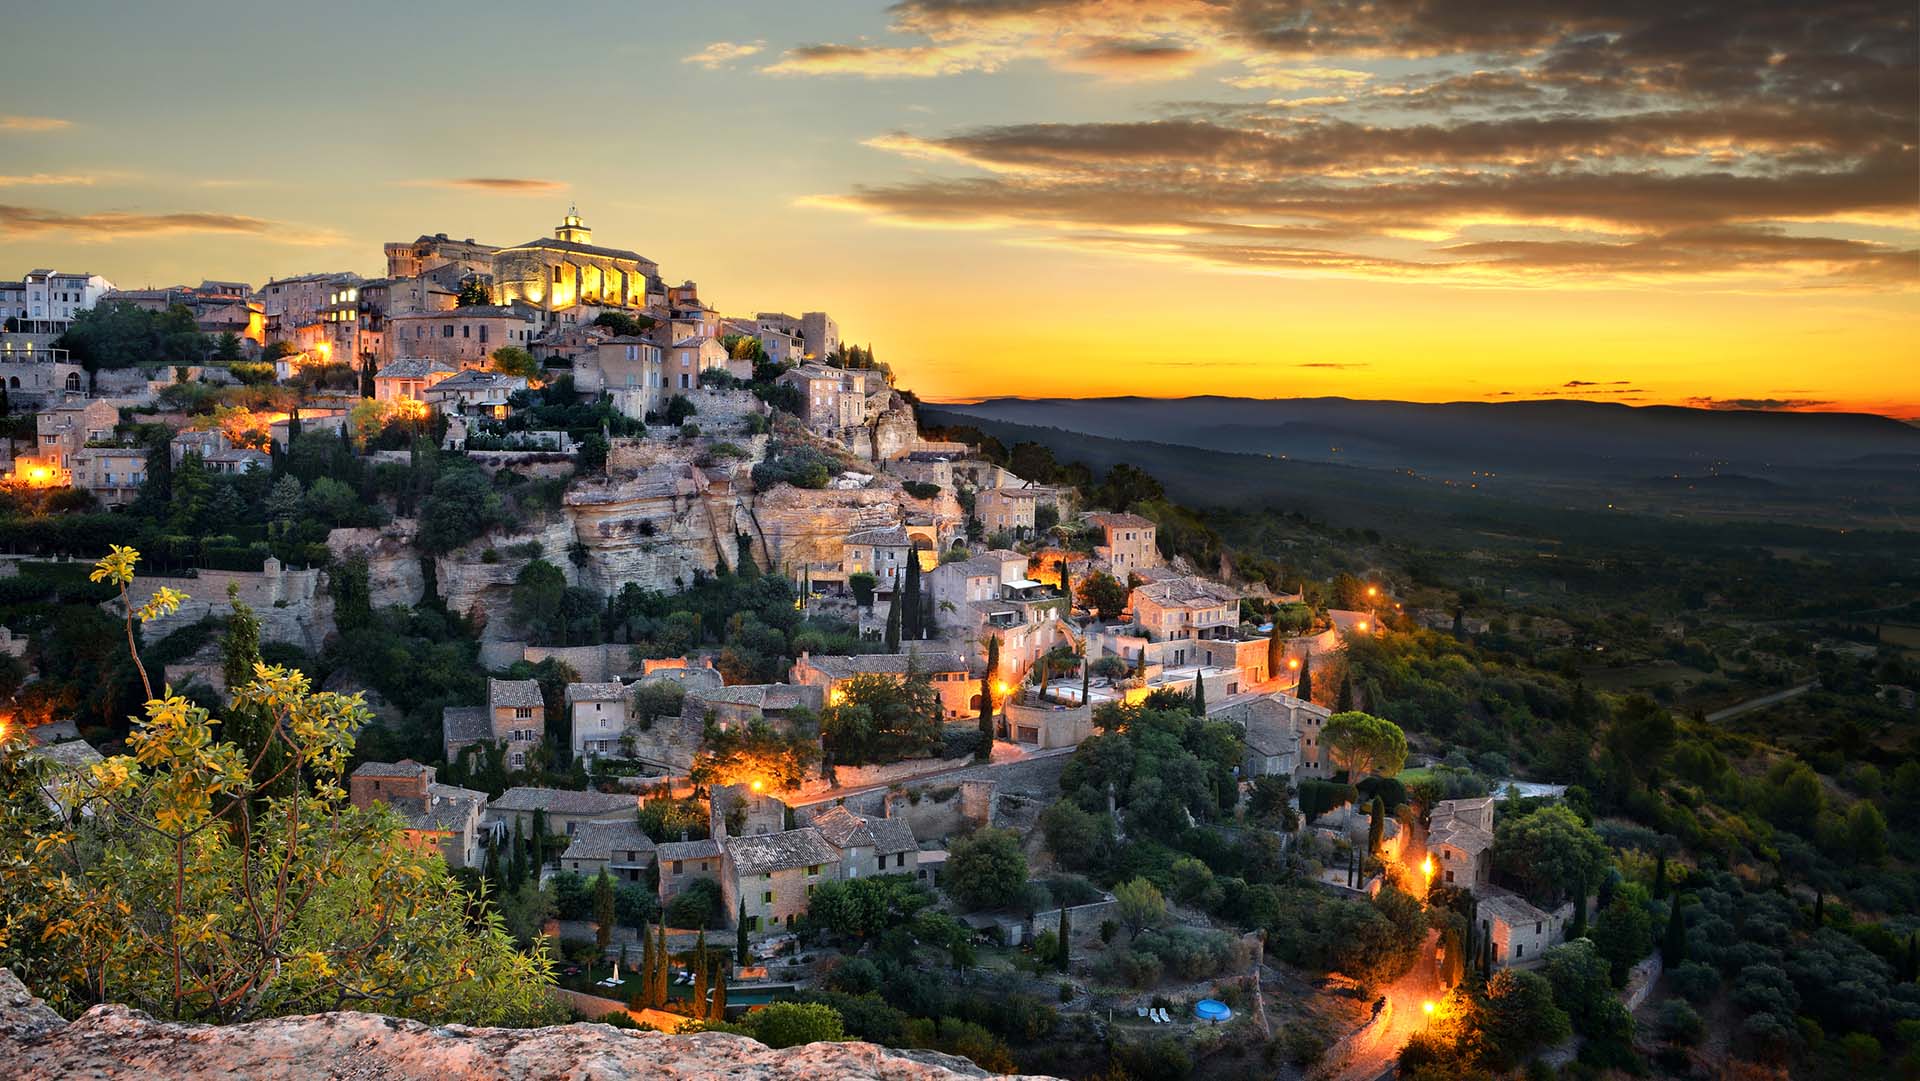 Gordes, one of the most beautiful and most visited french villages